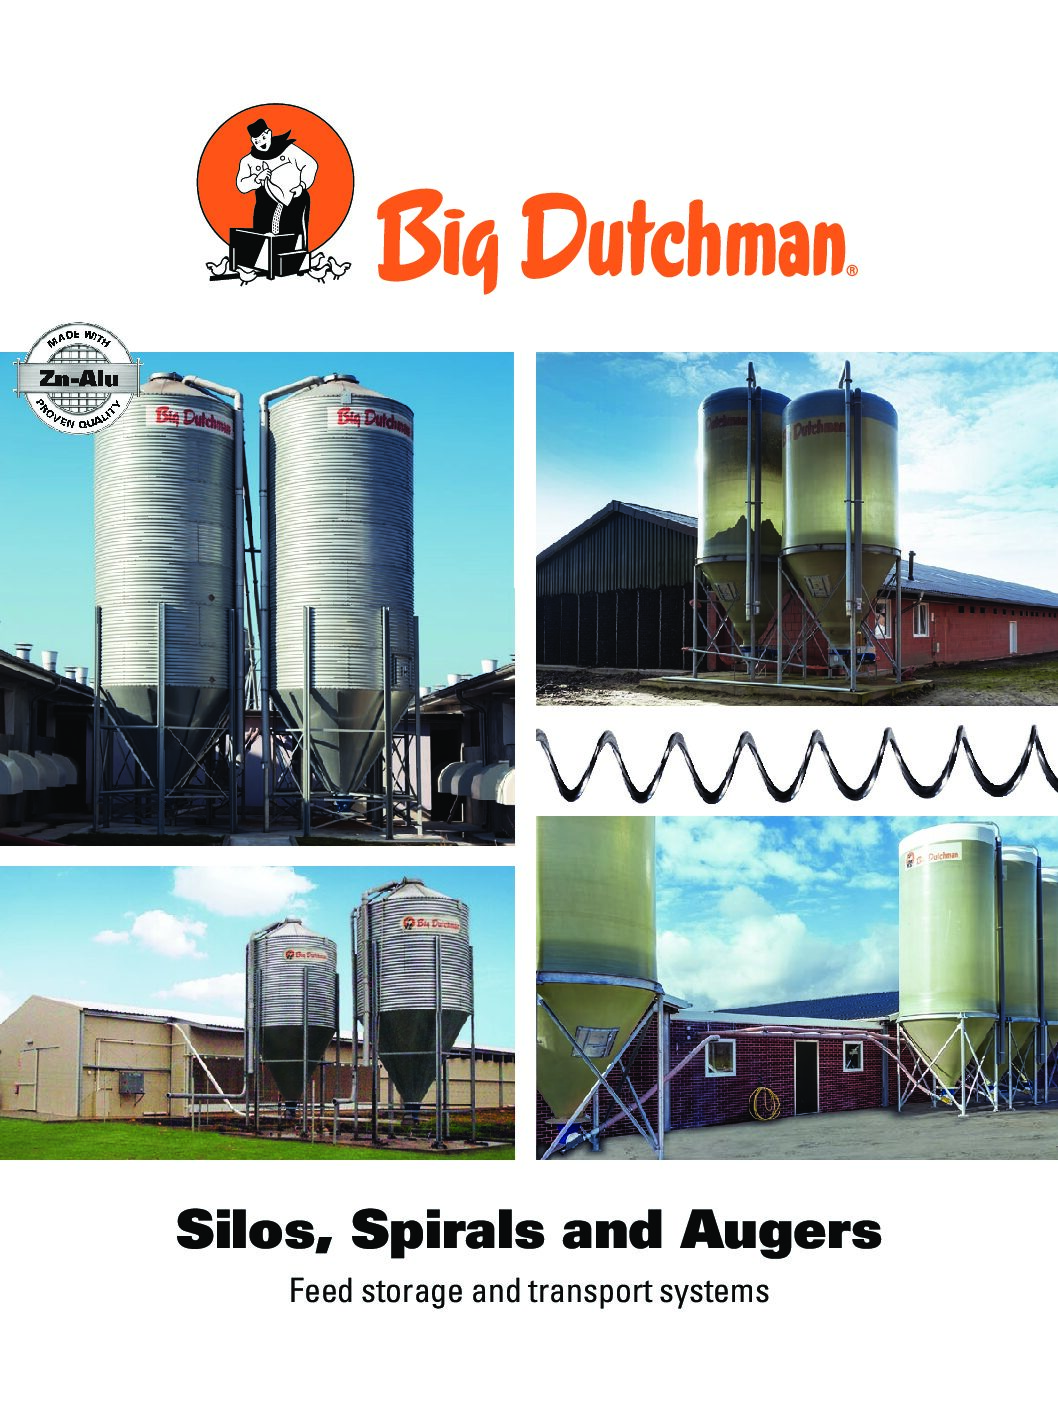 Silos, Spirals and Augers